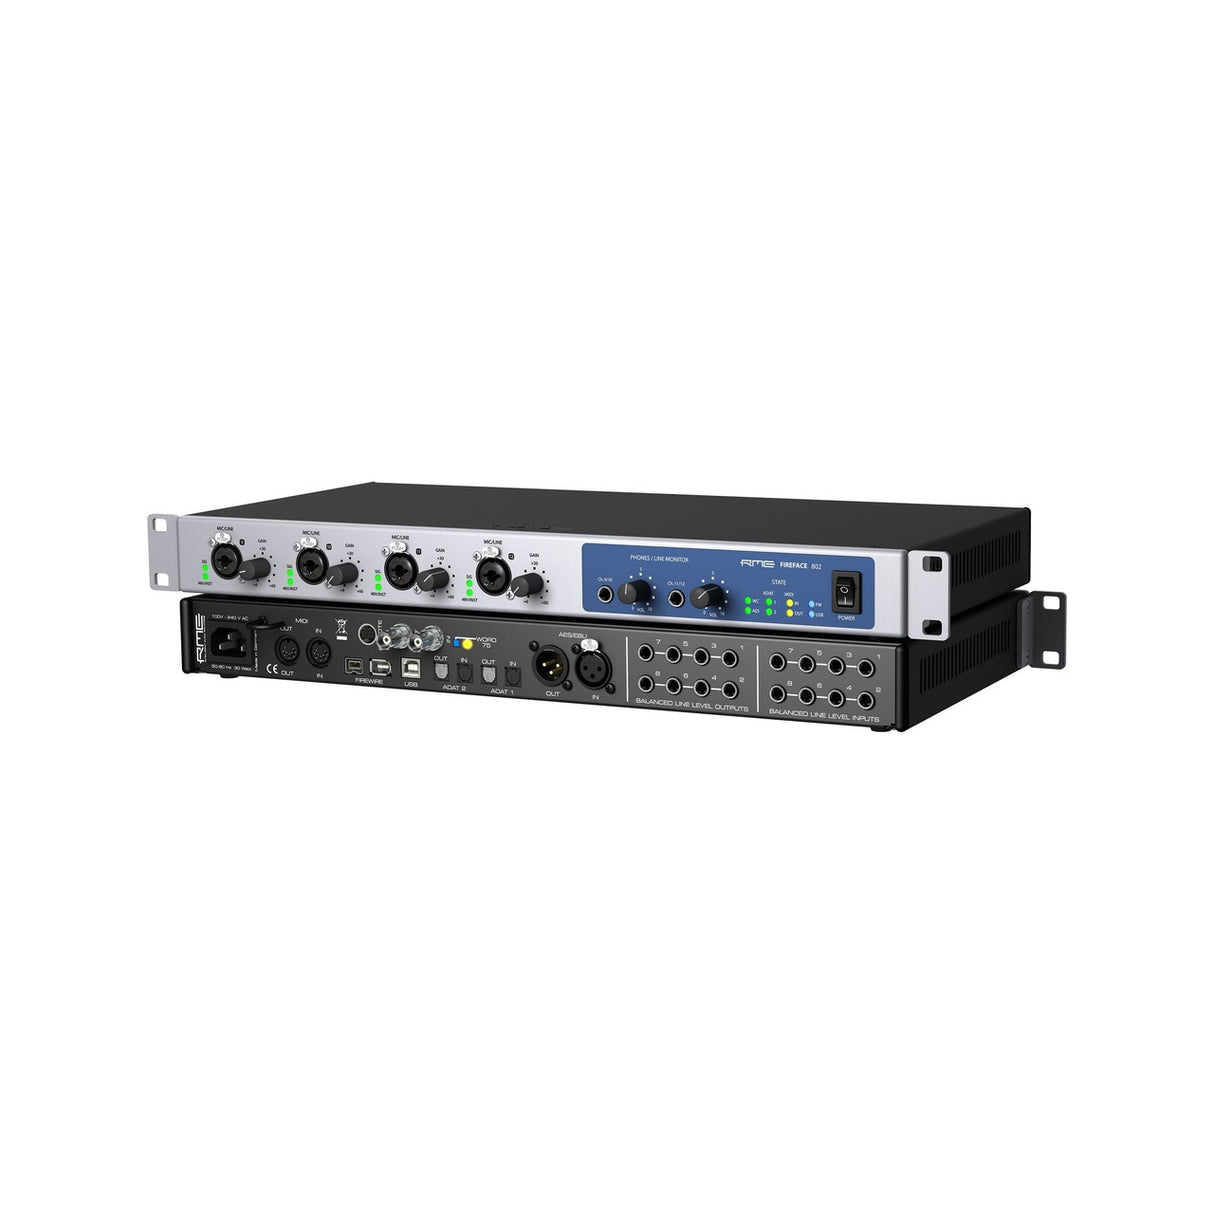 RME Fireface 802 | 60 Channel High End 192 kHz USB Firewire Audio Interface